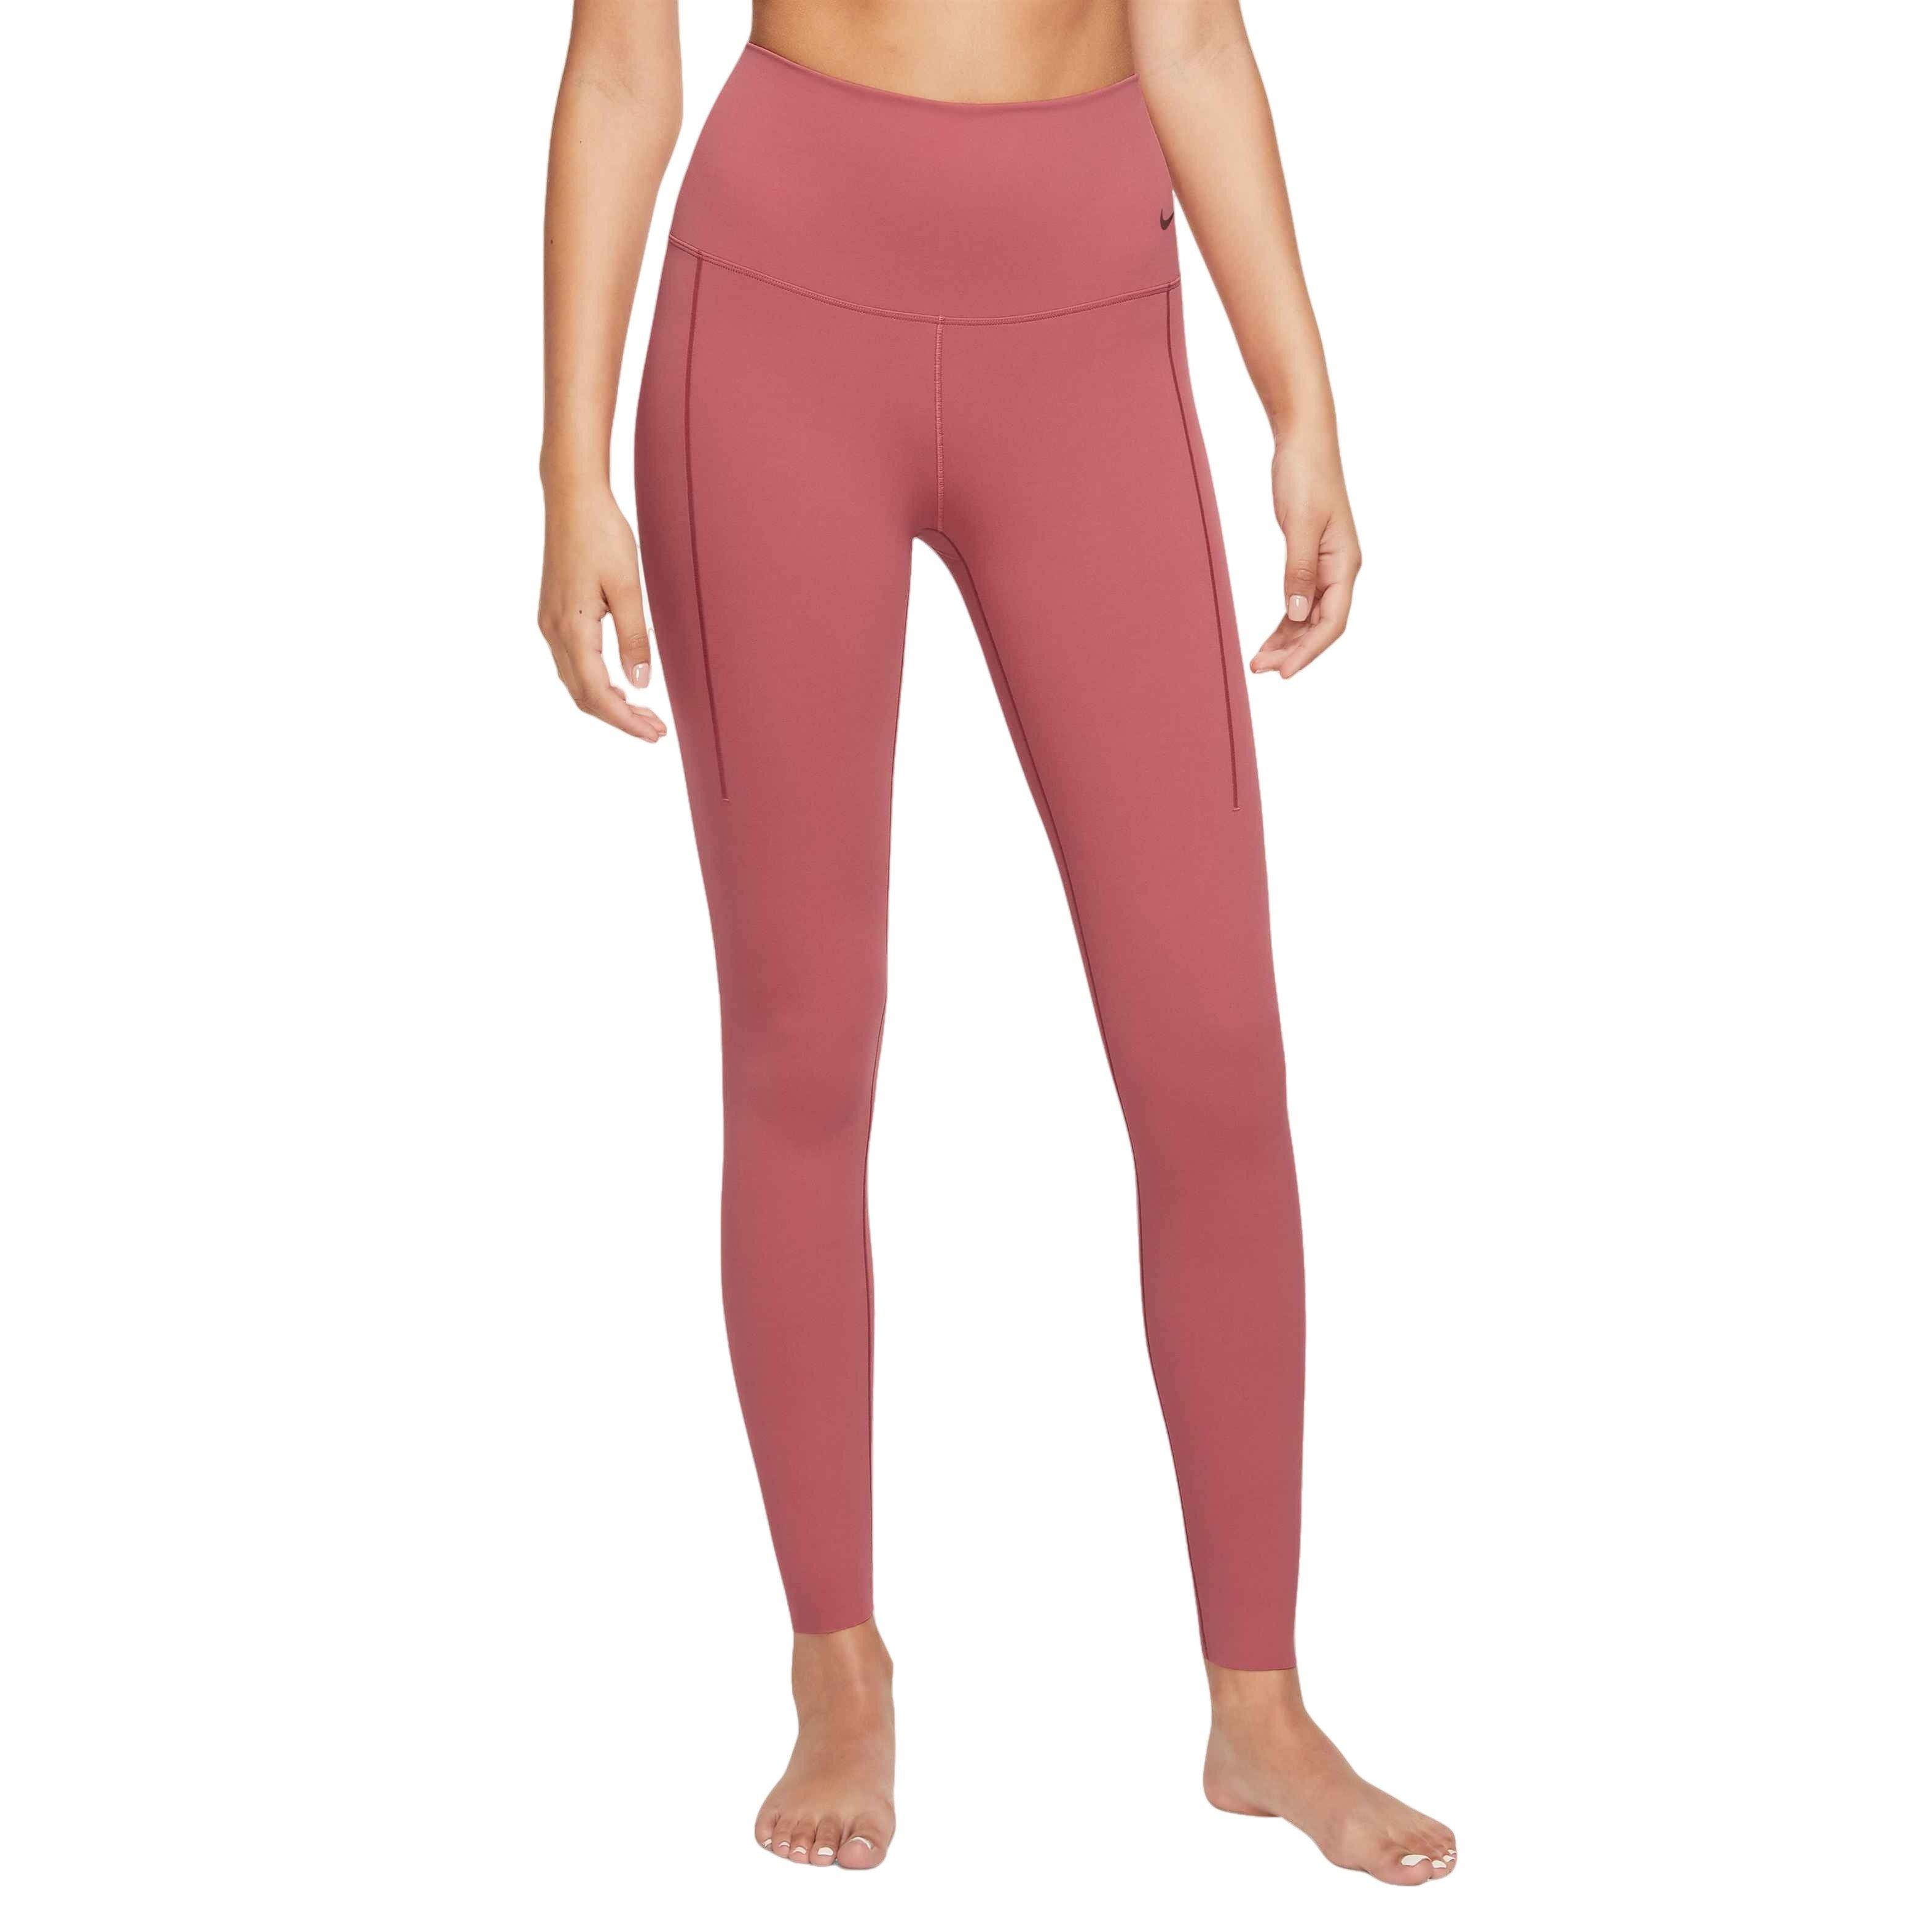 Nike Women's​ Dri-FIT​ Zen​vy​ Yoga Gentle-Support High-Waisted 7